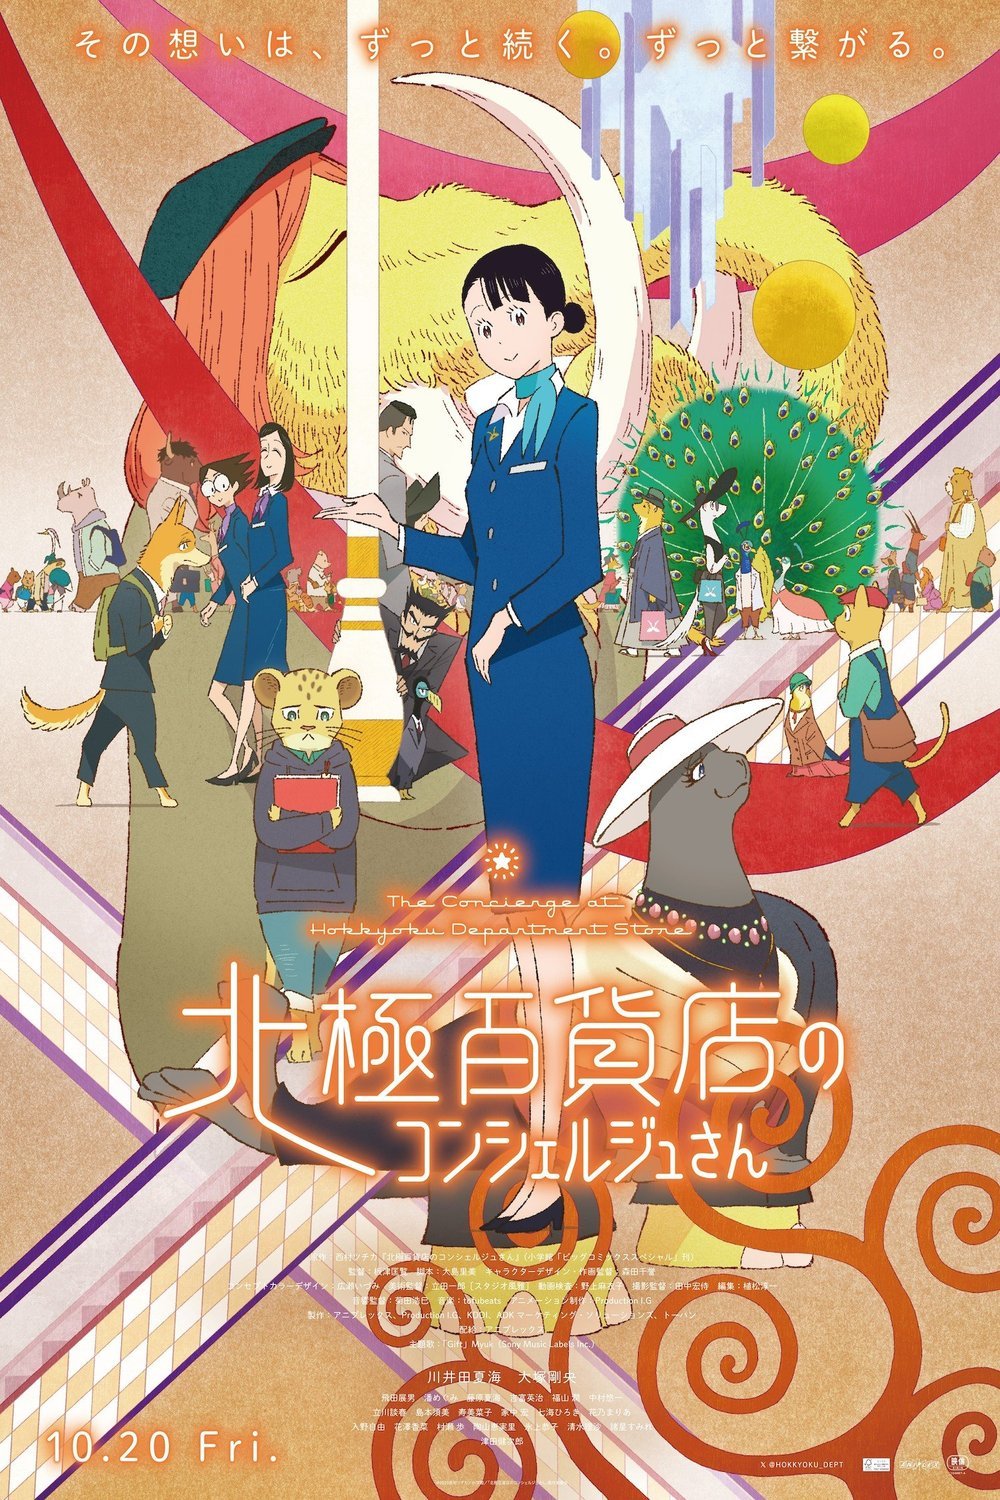 Japanese poster of the movie The Concierge at Hokkyoku Department Store